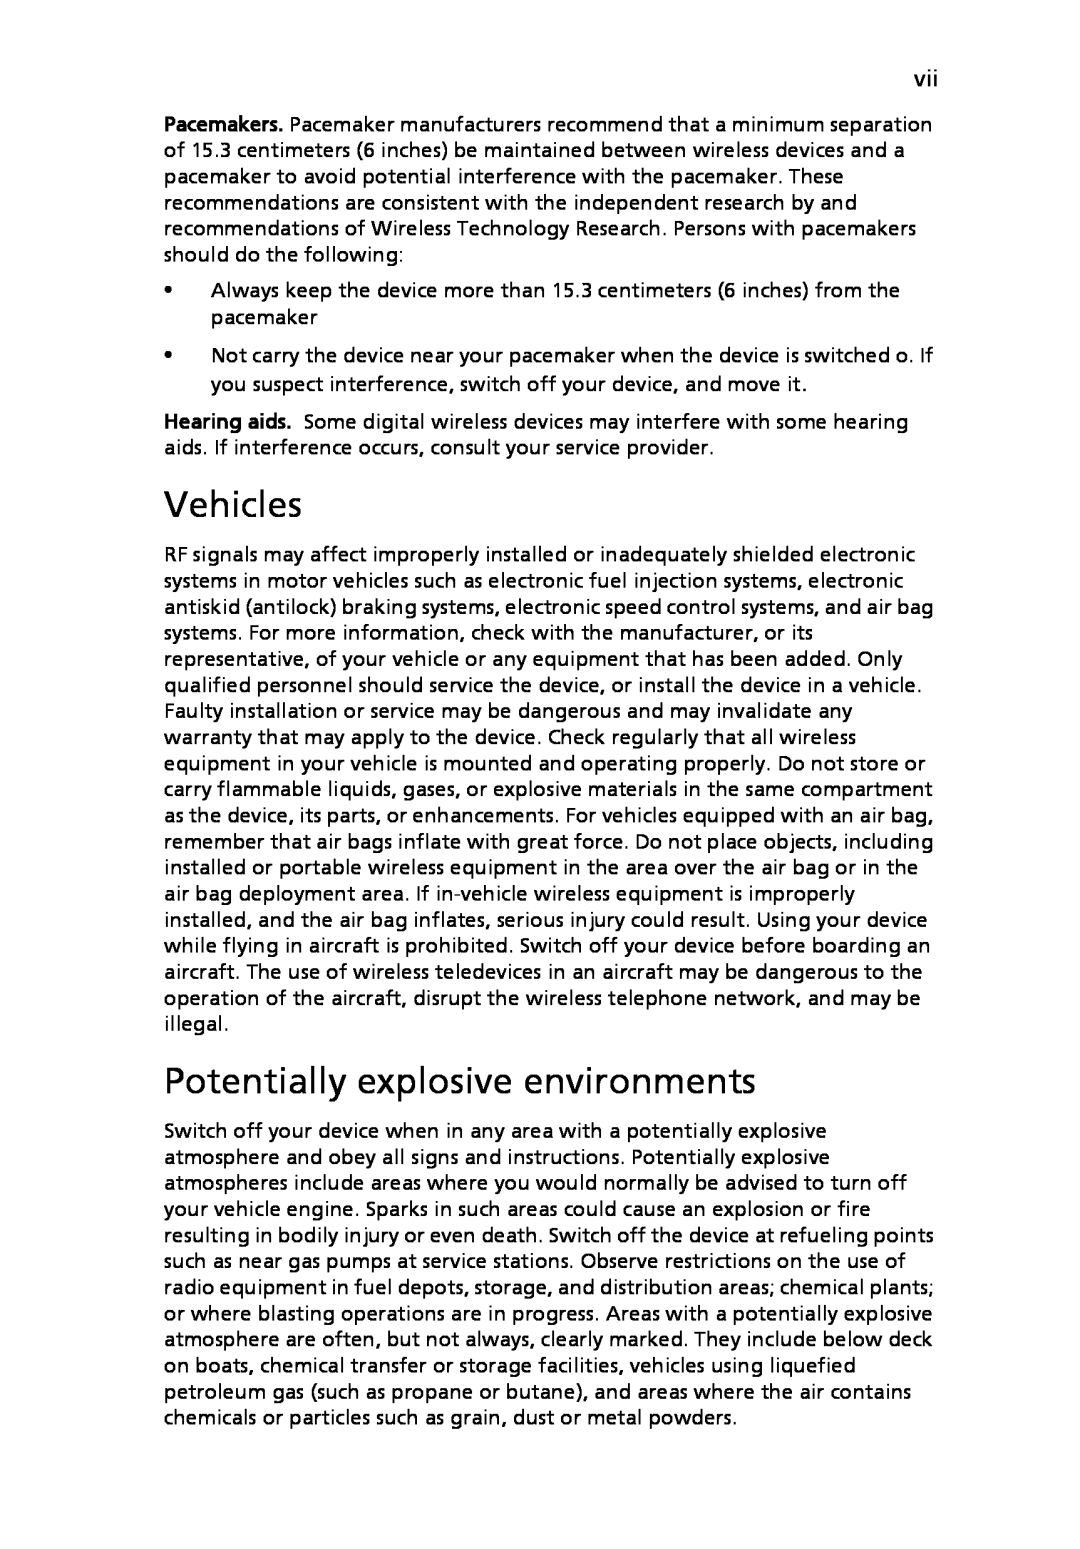 Acer 9120 manual Vehicles, Potentially explosive environments 